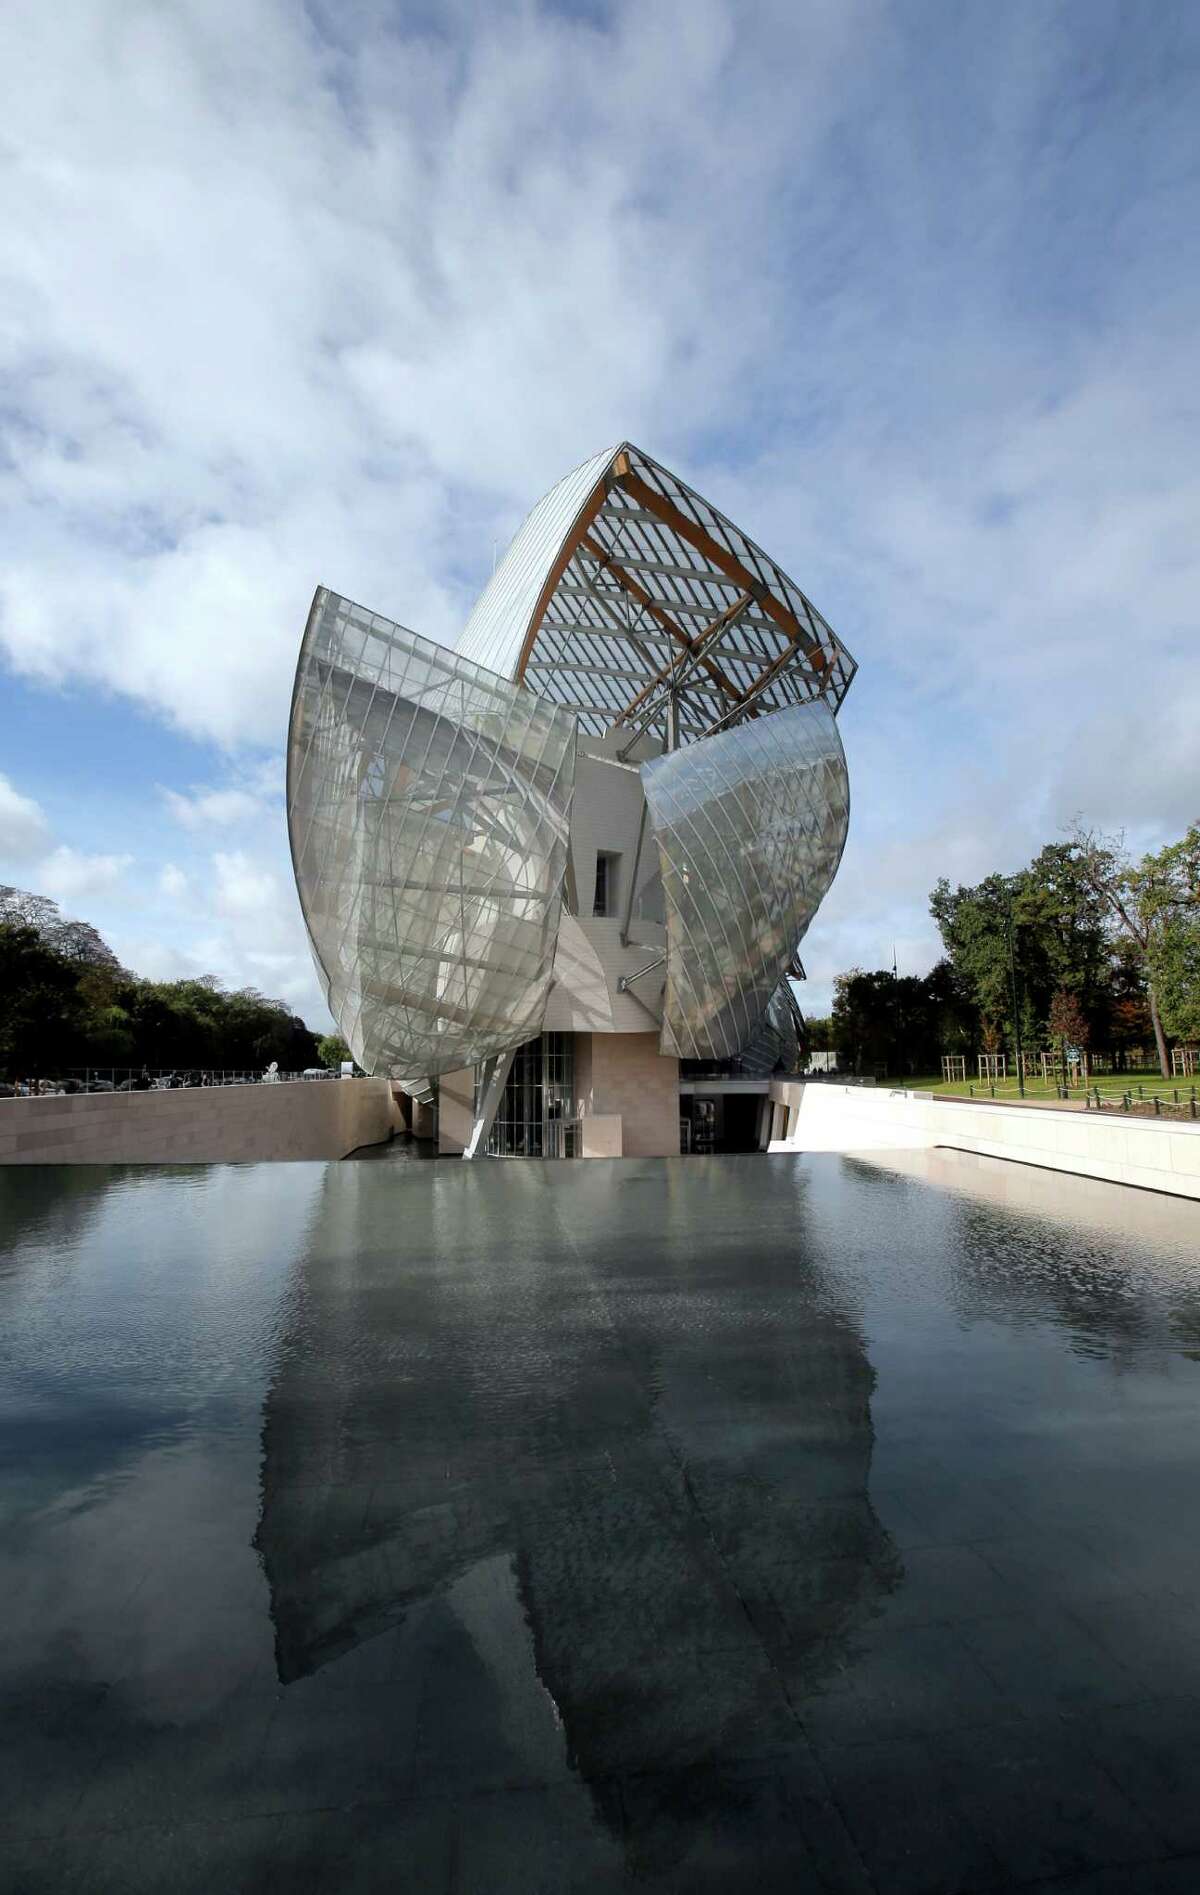 The $127 million Louis Vuitton Foundation art museum and cultural center created by architect Frank Gehry has been compared to an iceberg or giant sailboat.